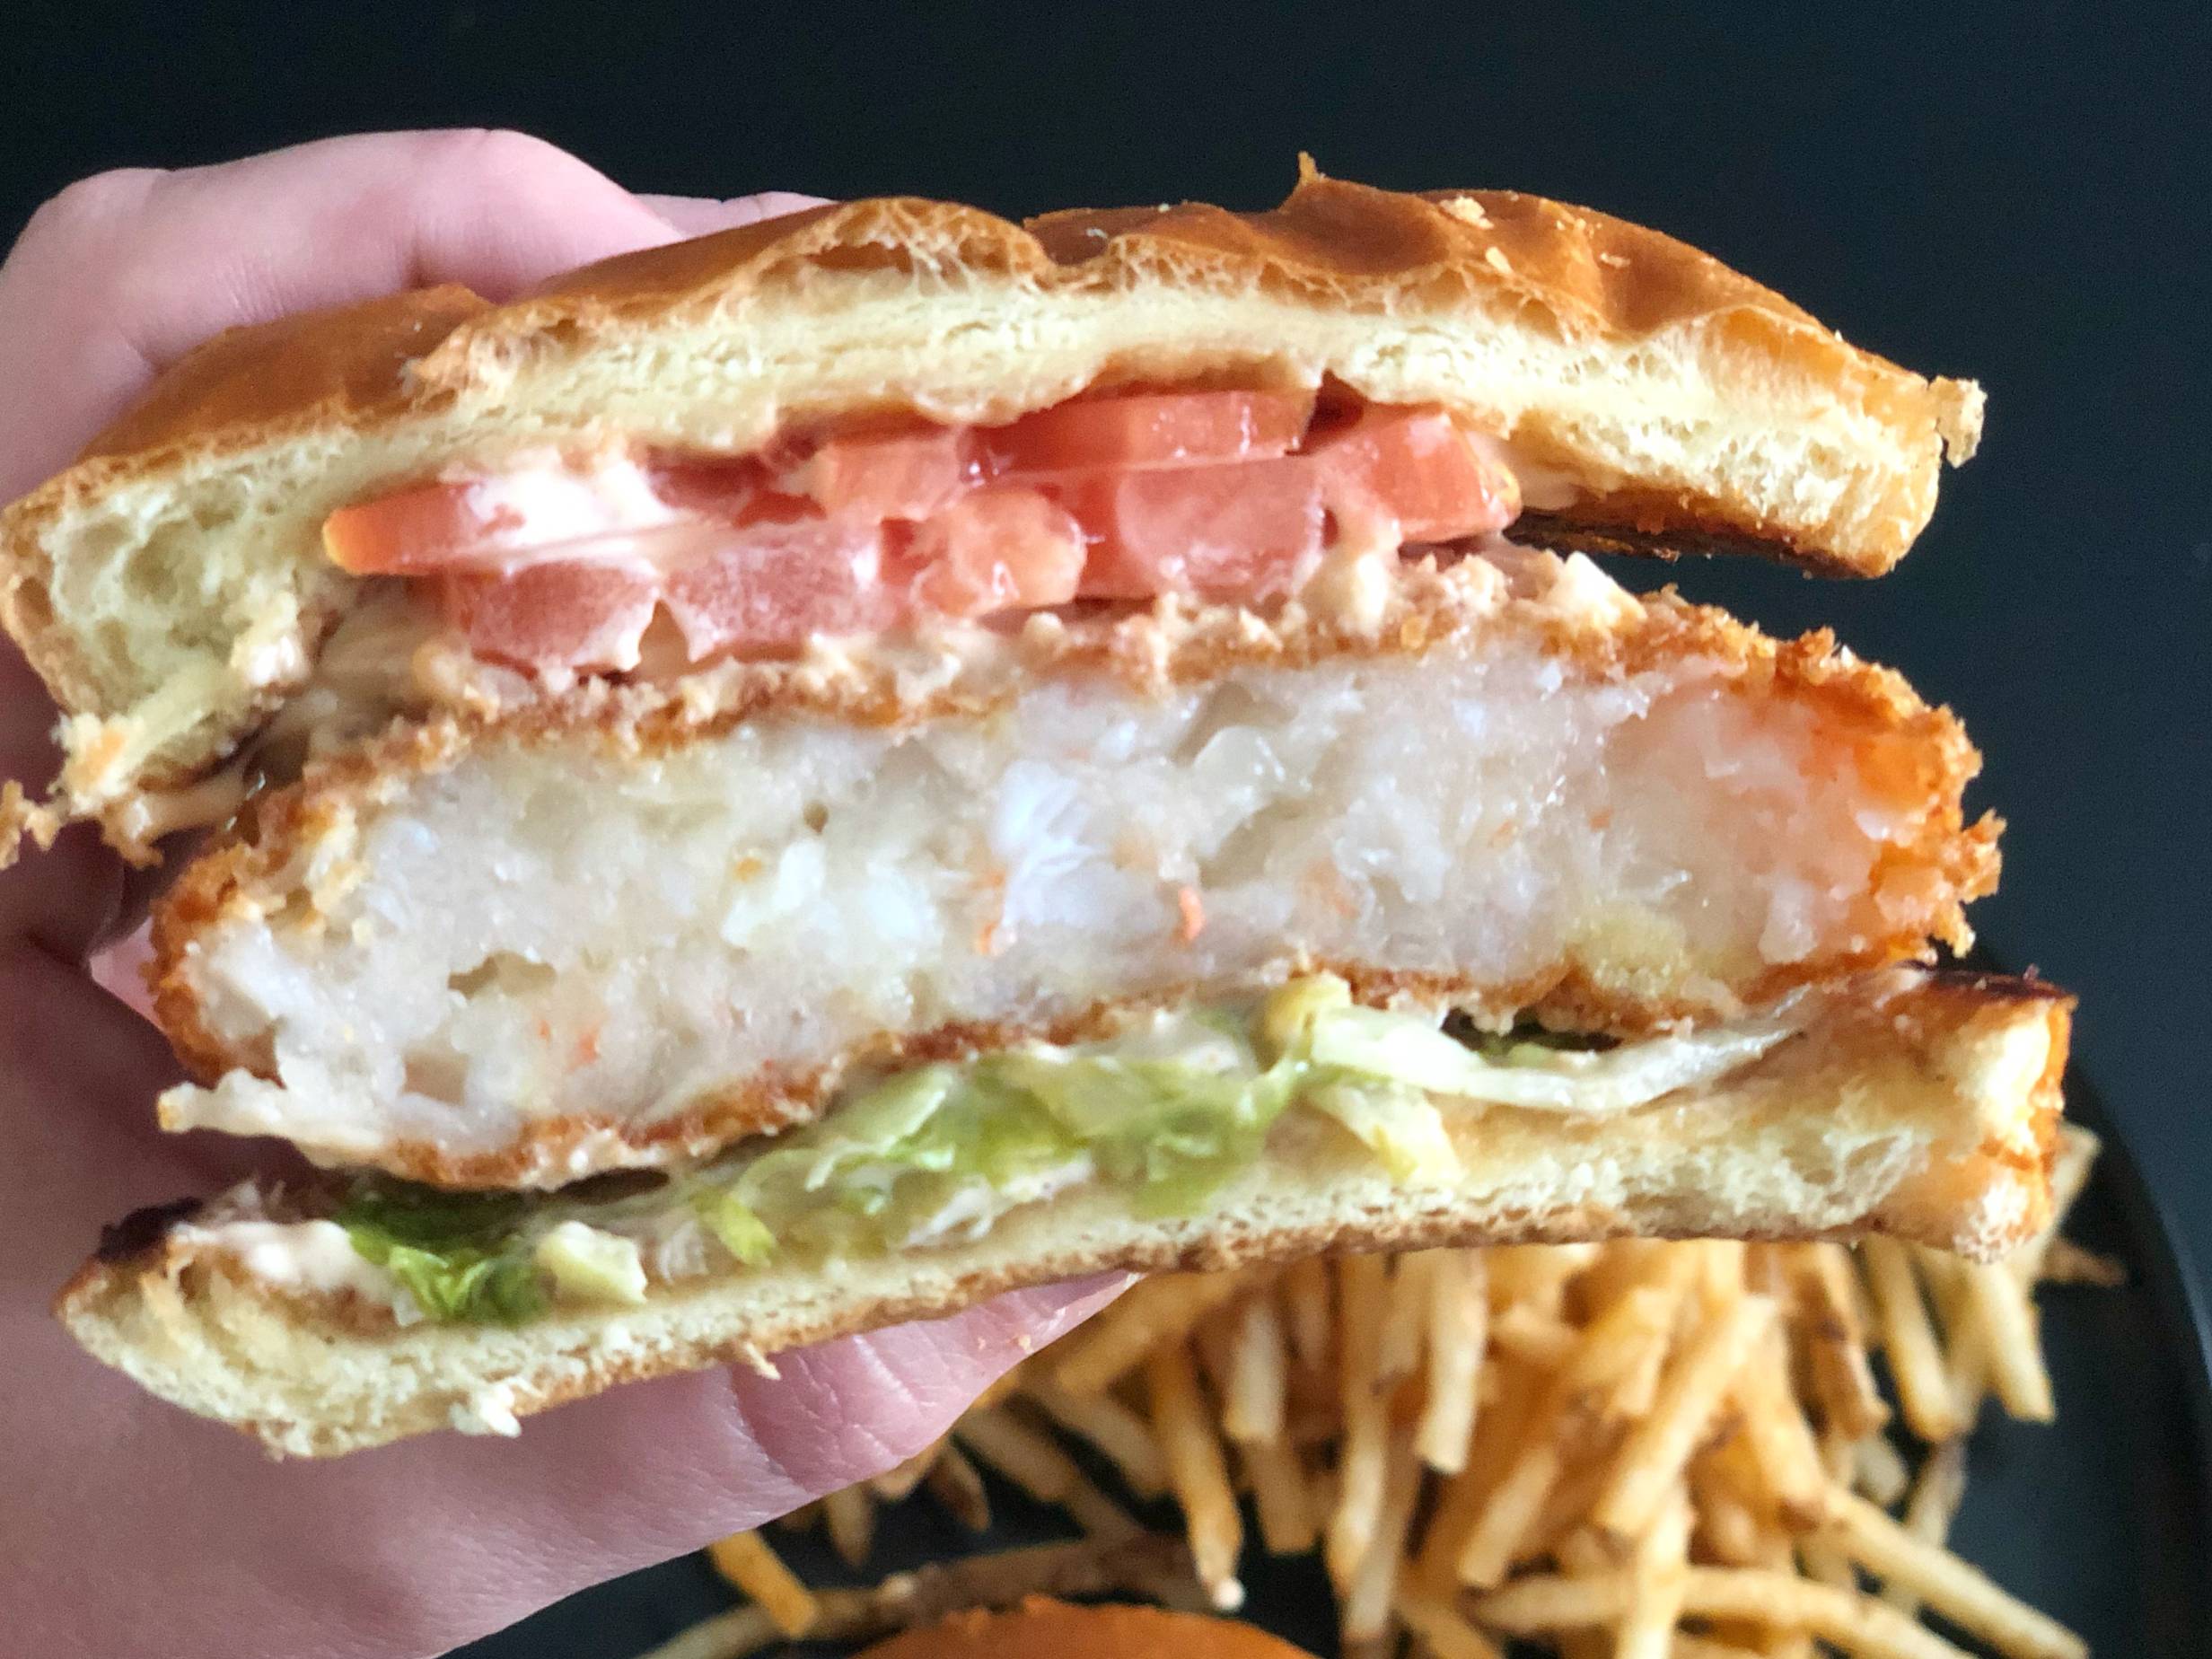 I tried a Korean shrimp burger for the first time, and it was wild